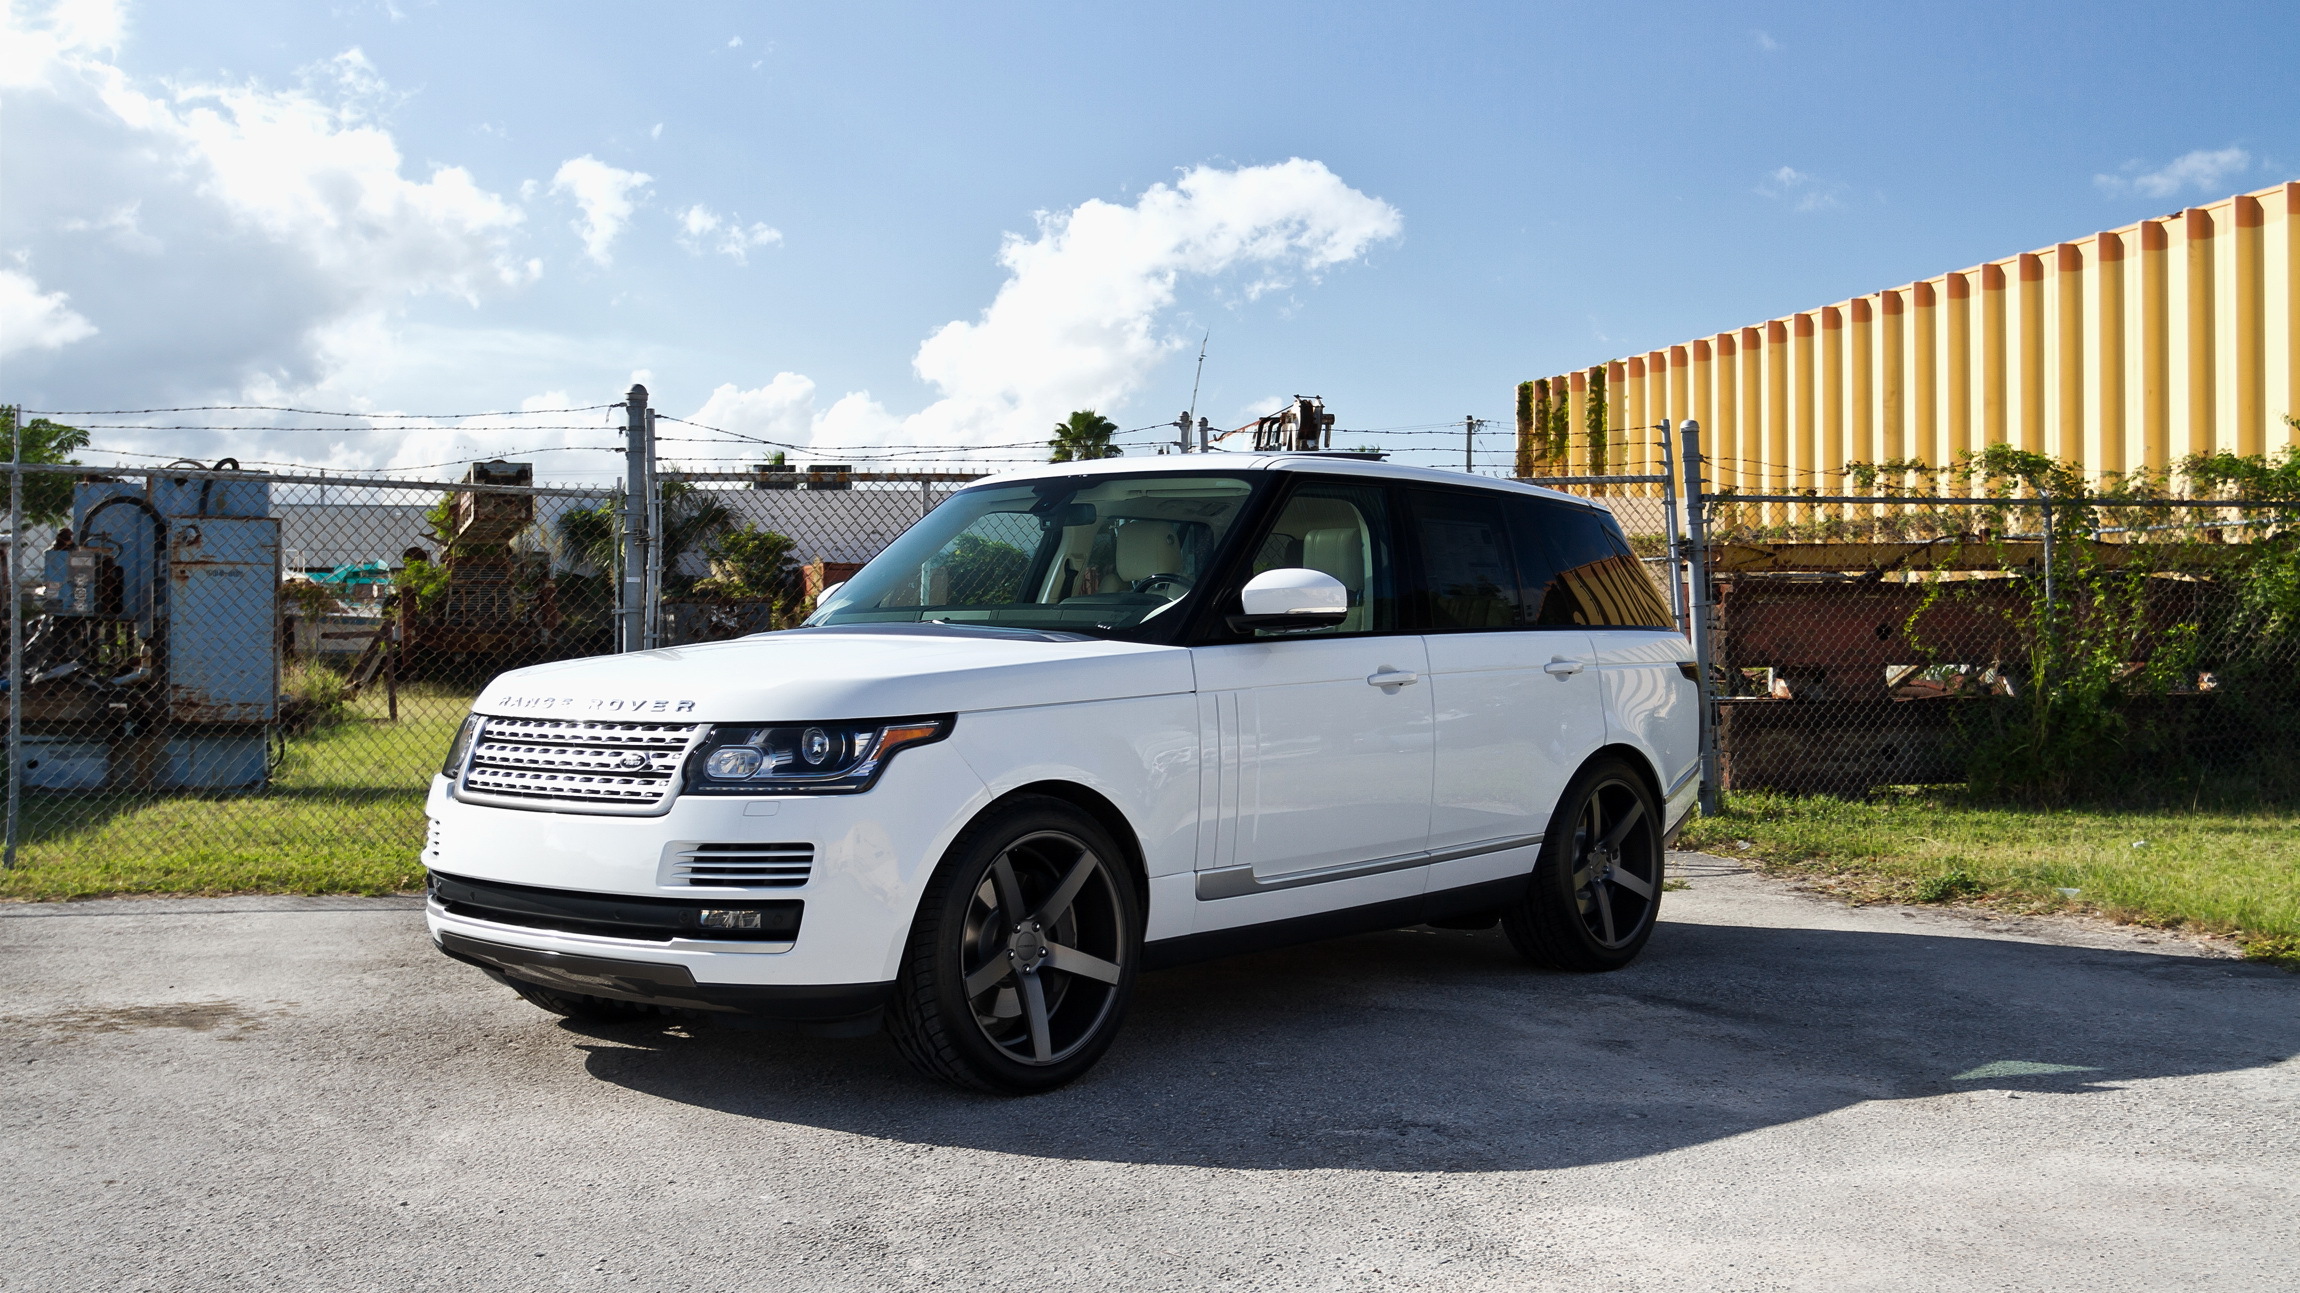 range rover, white, sports, cars New Lock Screen Backgrounds